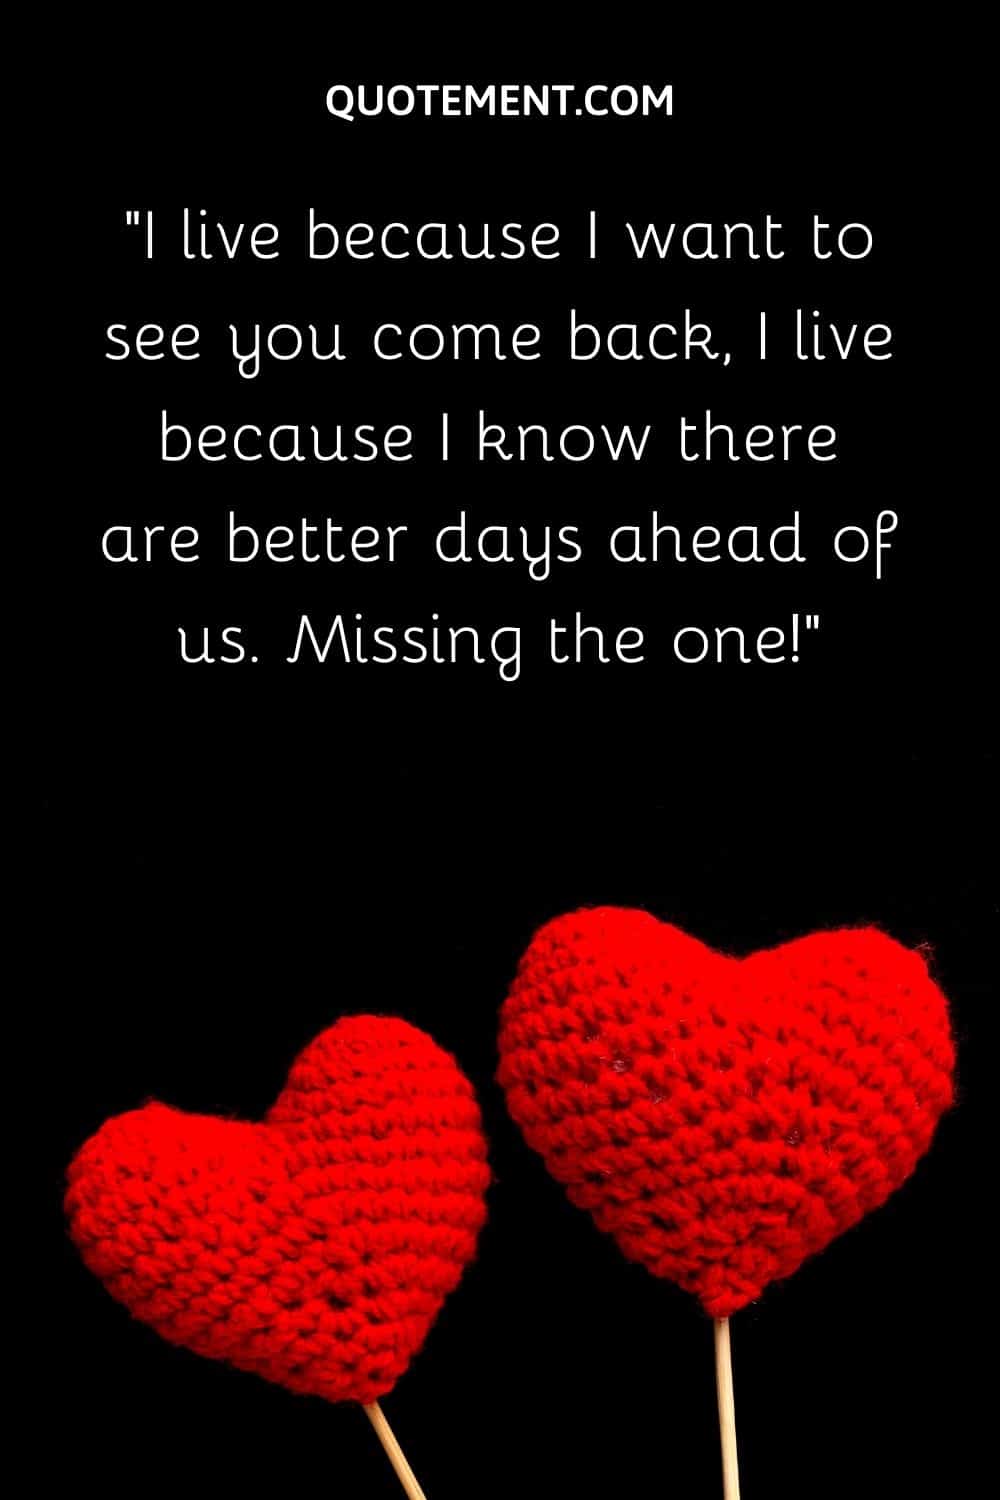 I live because I want to see you come back, I live because I know there are better days ahead of us. Missing the one!